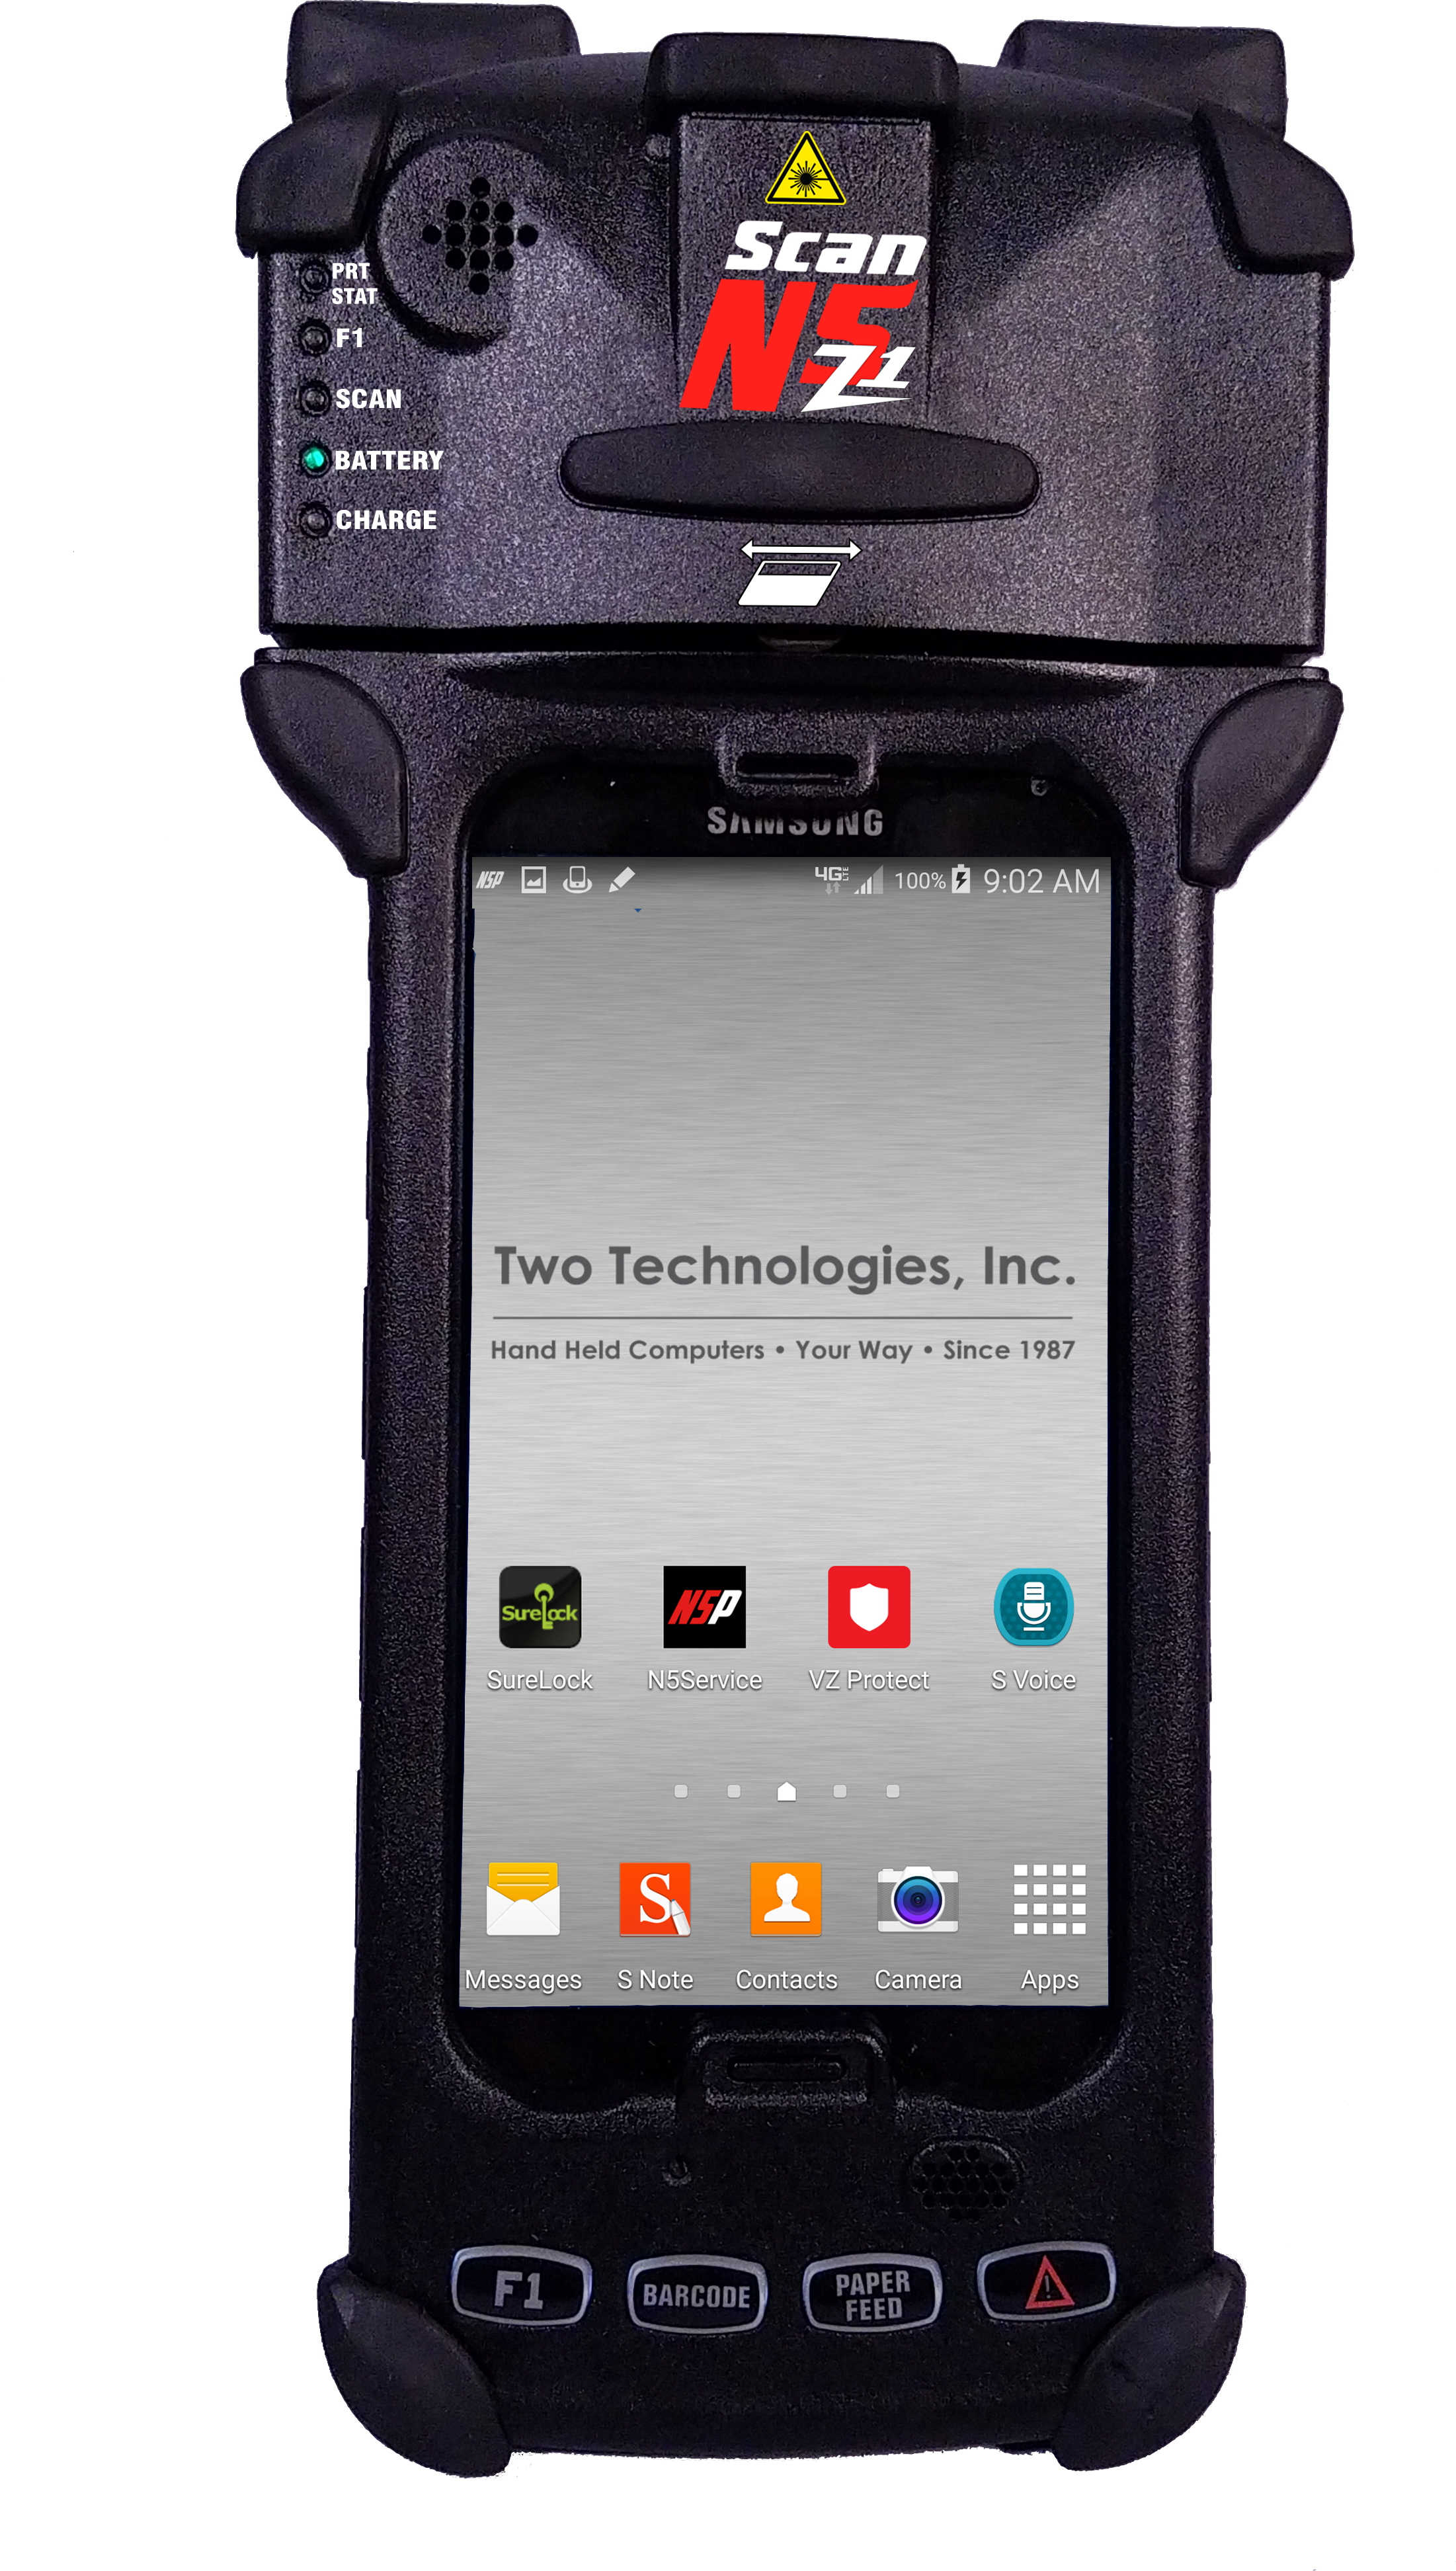 N5Scan is the rugged handheld Android computer scanner